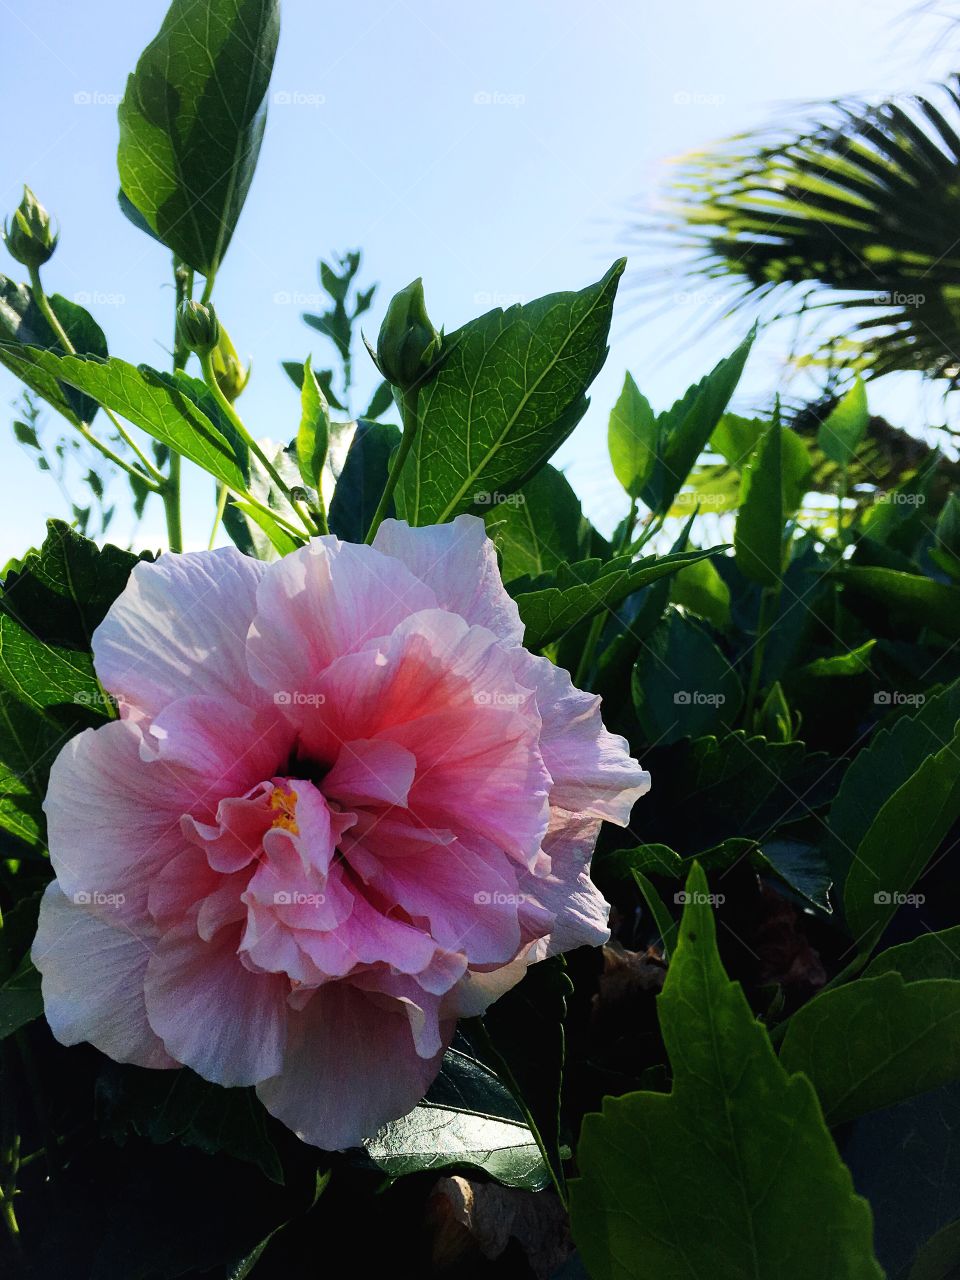 Pink hibiscus blooming among green leaves in the tropics.